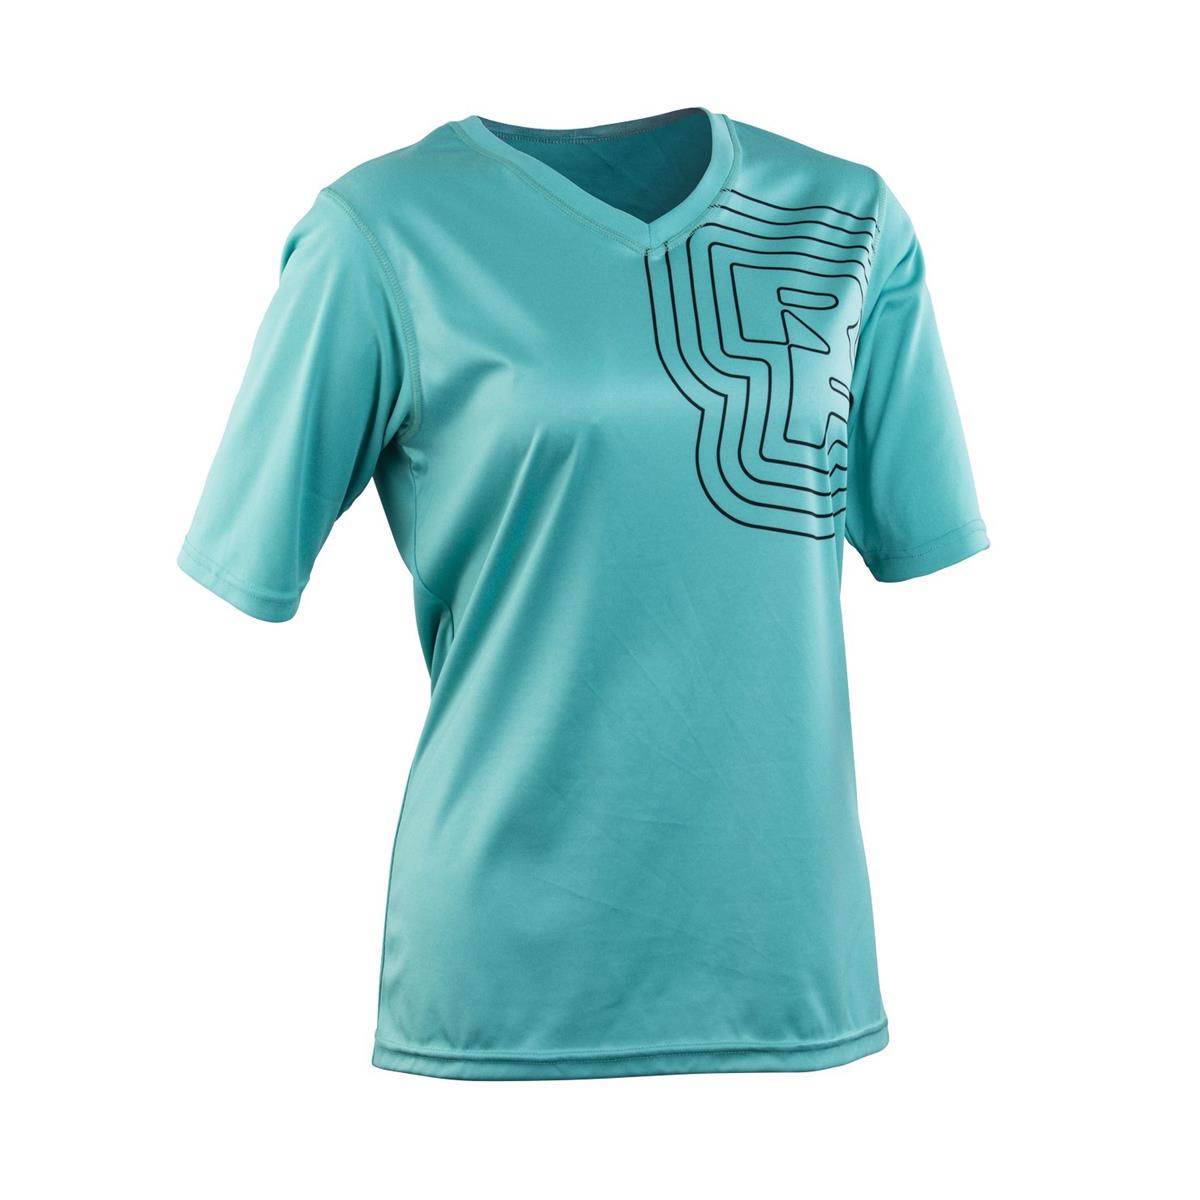 Race Face Girls Trail Jersey Charlie Turquoise